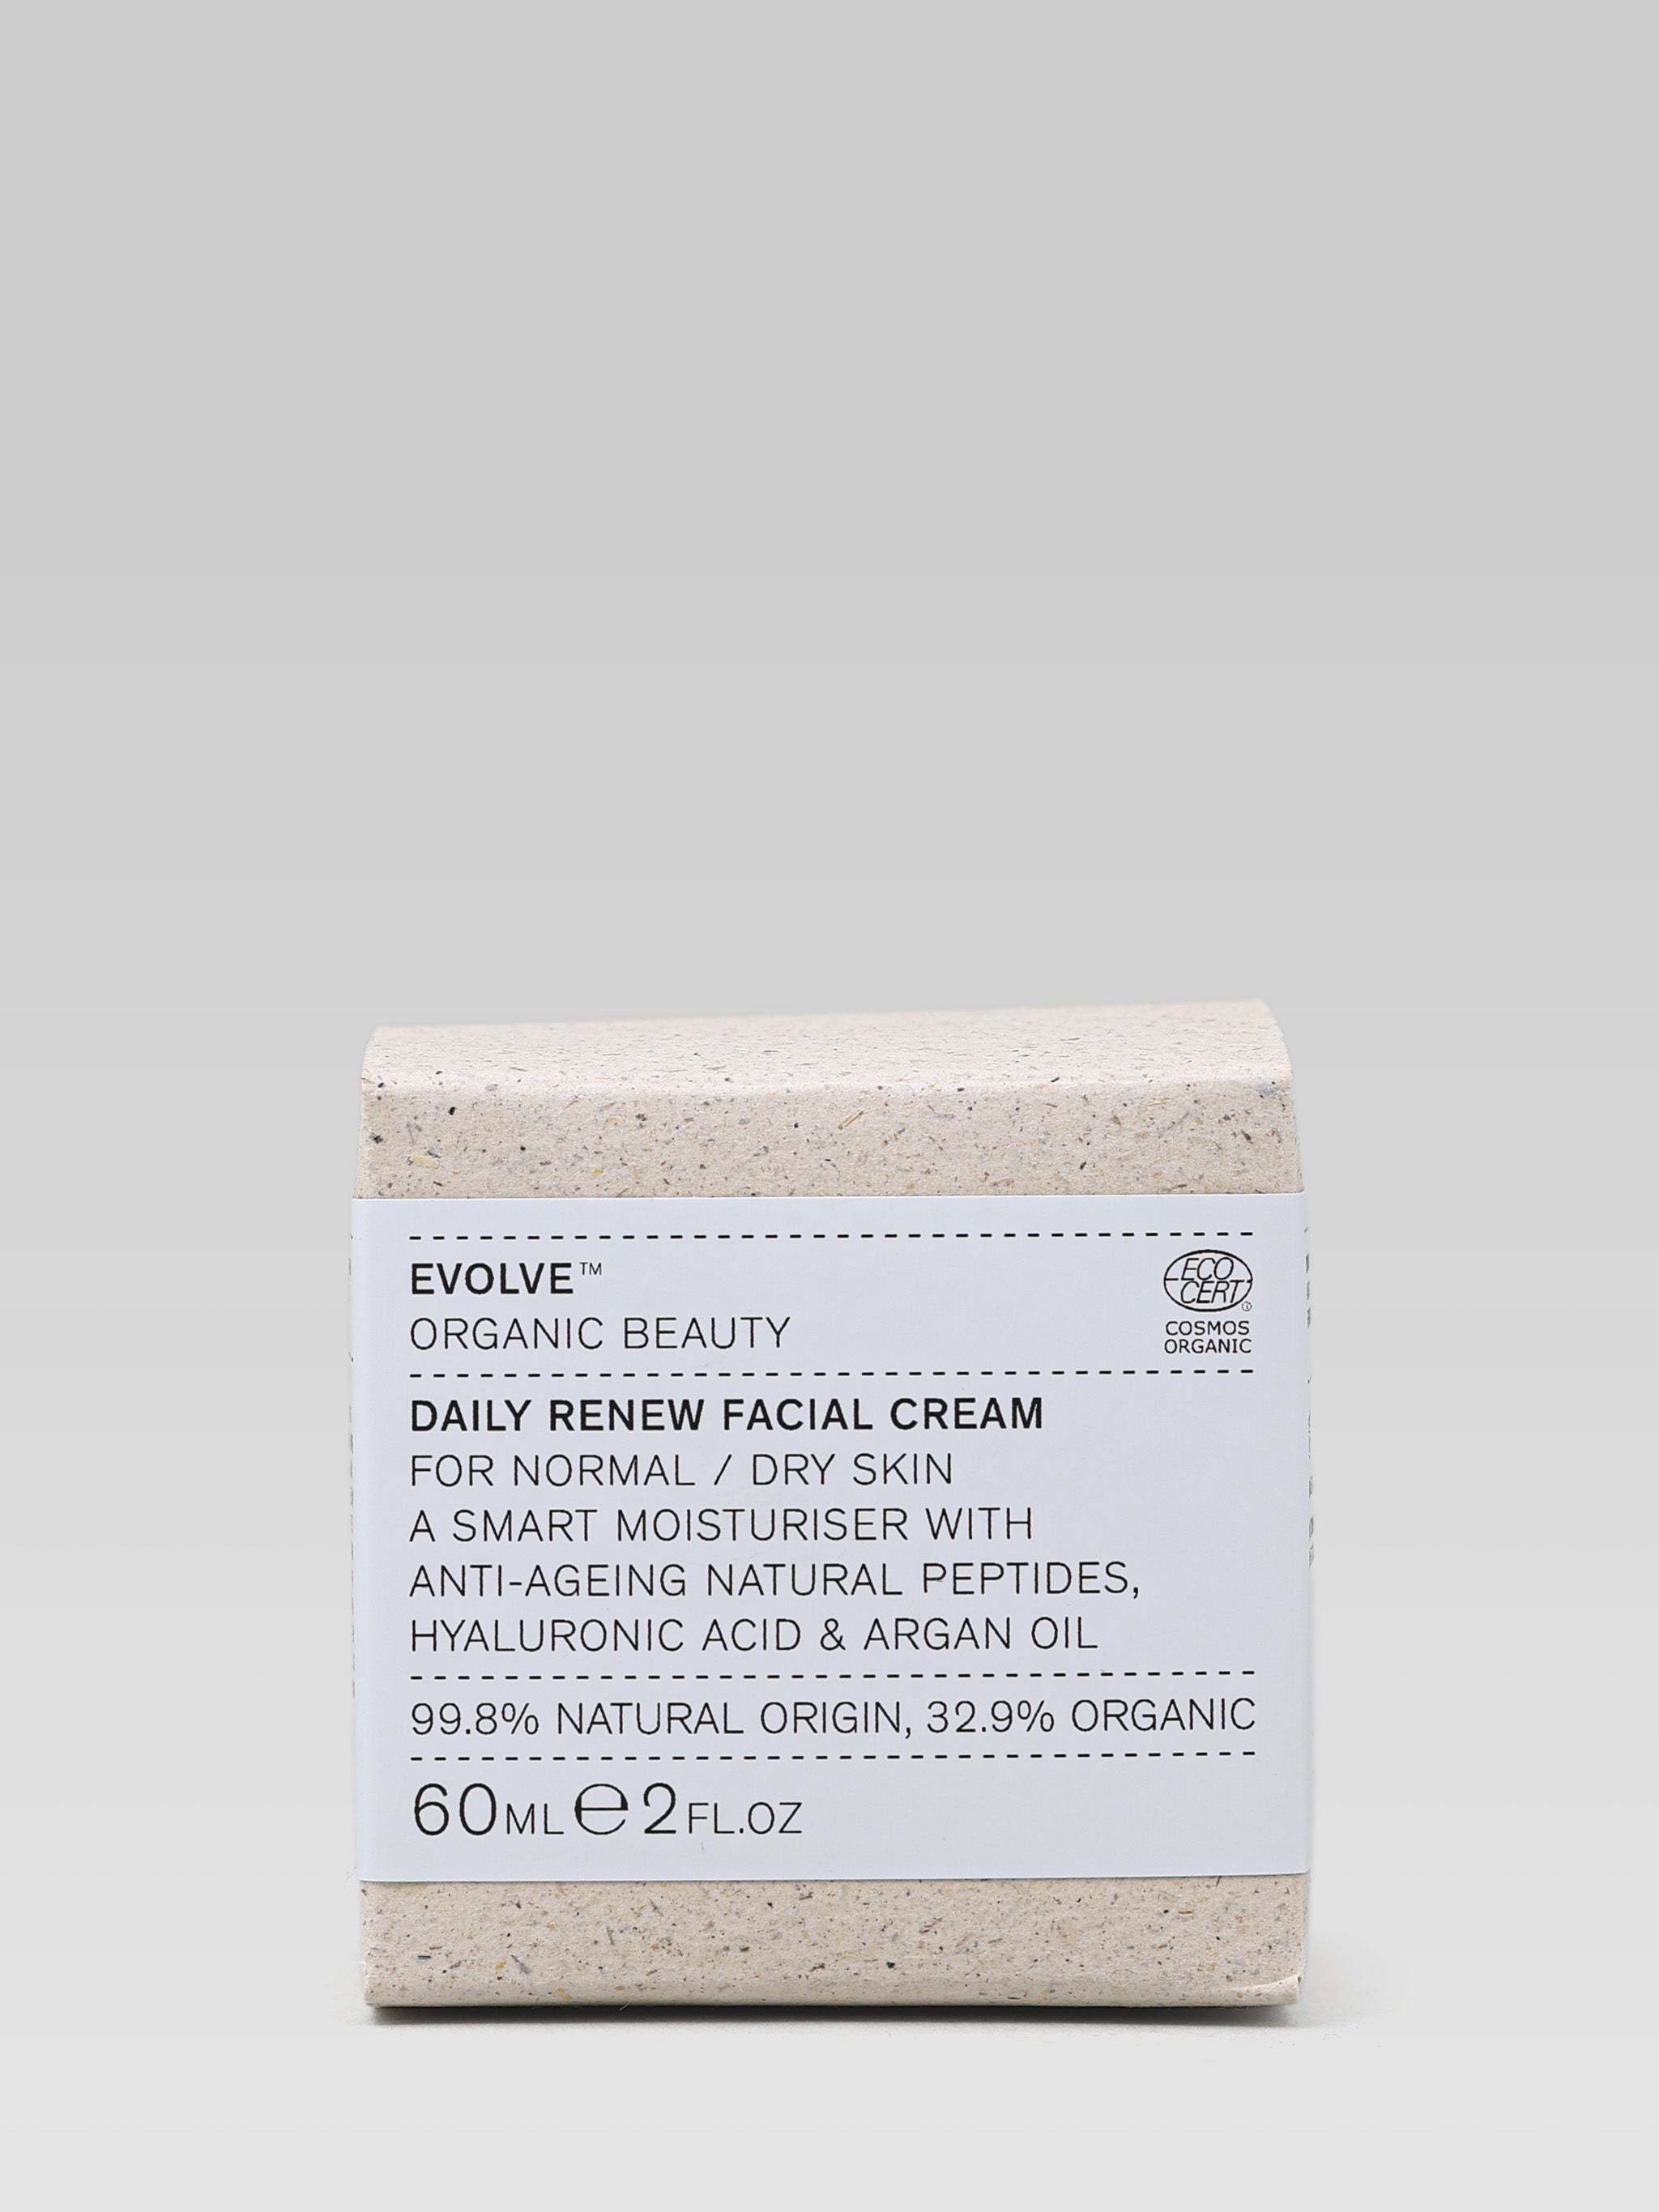 Evolve Beauty Daily Renew Facial Cream product packaging